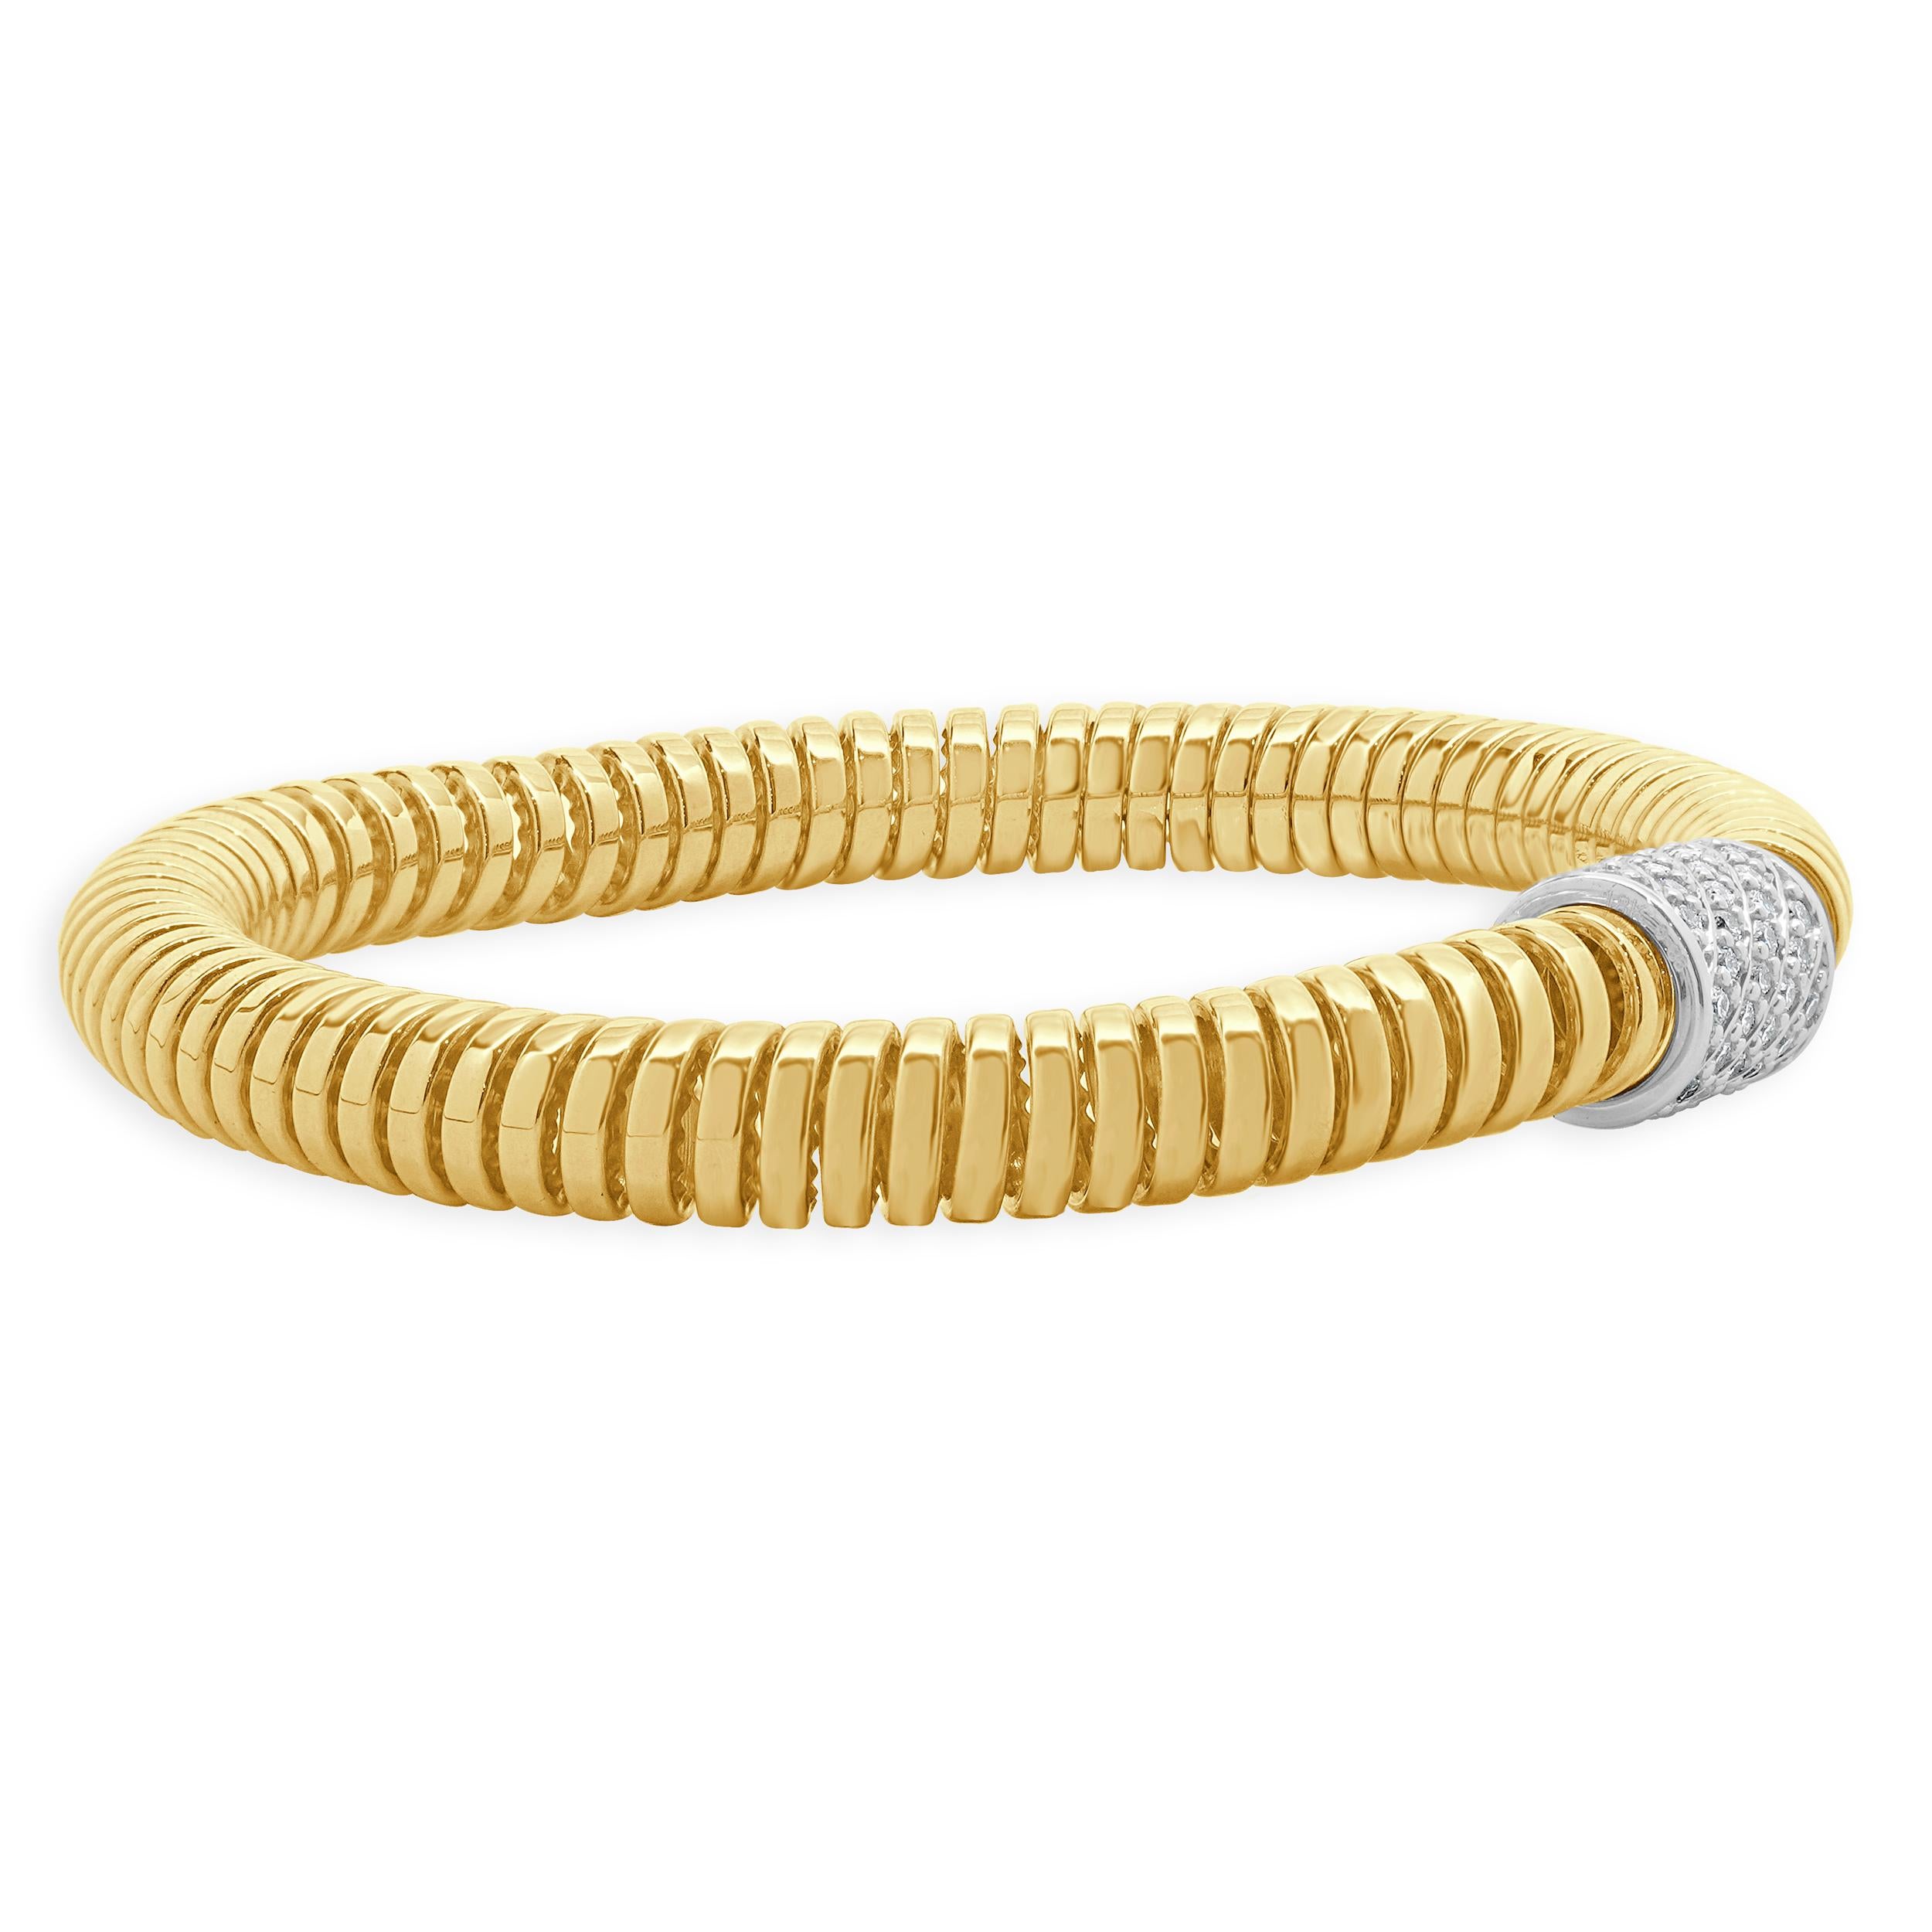 Designer: custom design
Material: 18K yellow & white gold
Diamond: round brilliant cut = 0.88cttw
Color: G / H
Clarity: VS-SI1
Dimensions: bracelet will fit up to a 7-inch wrist
Weight: 14.25 grams
